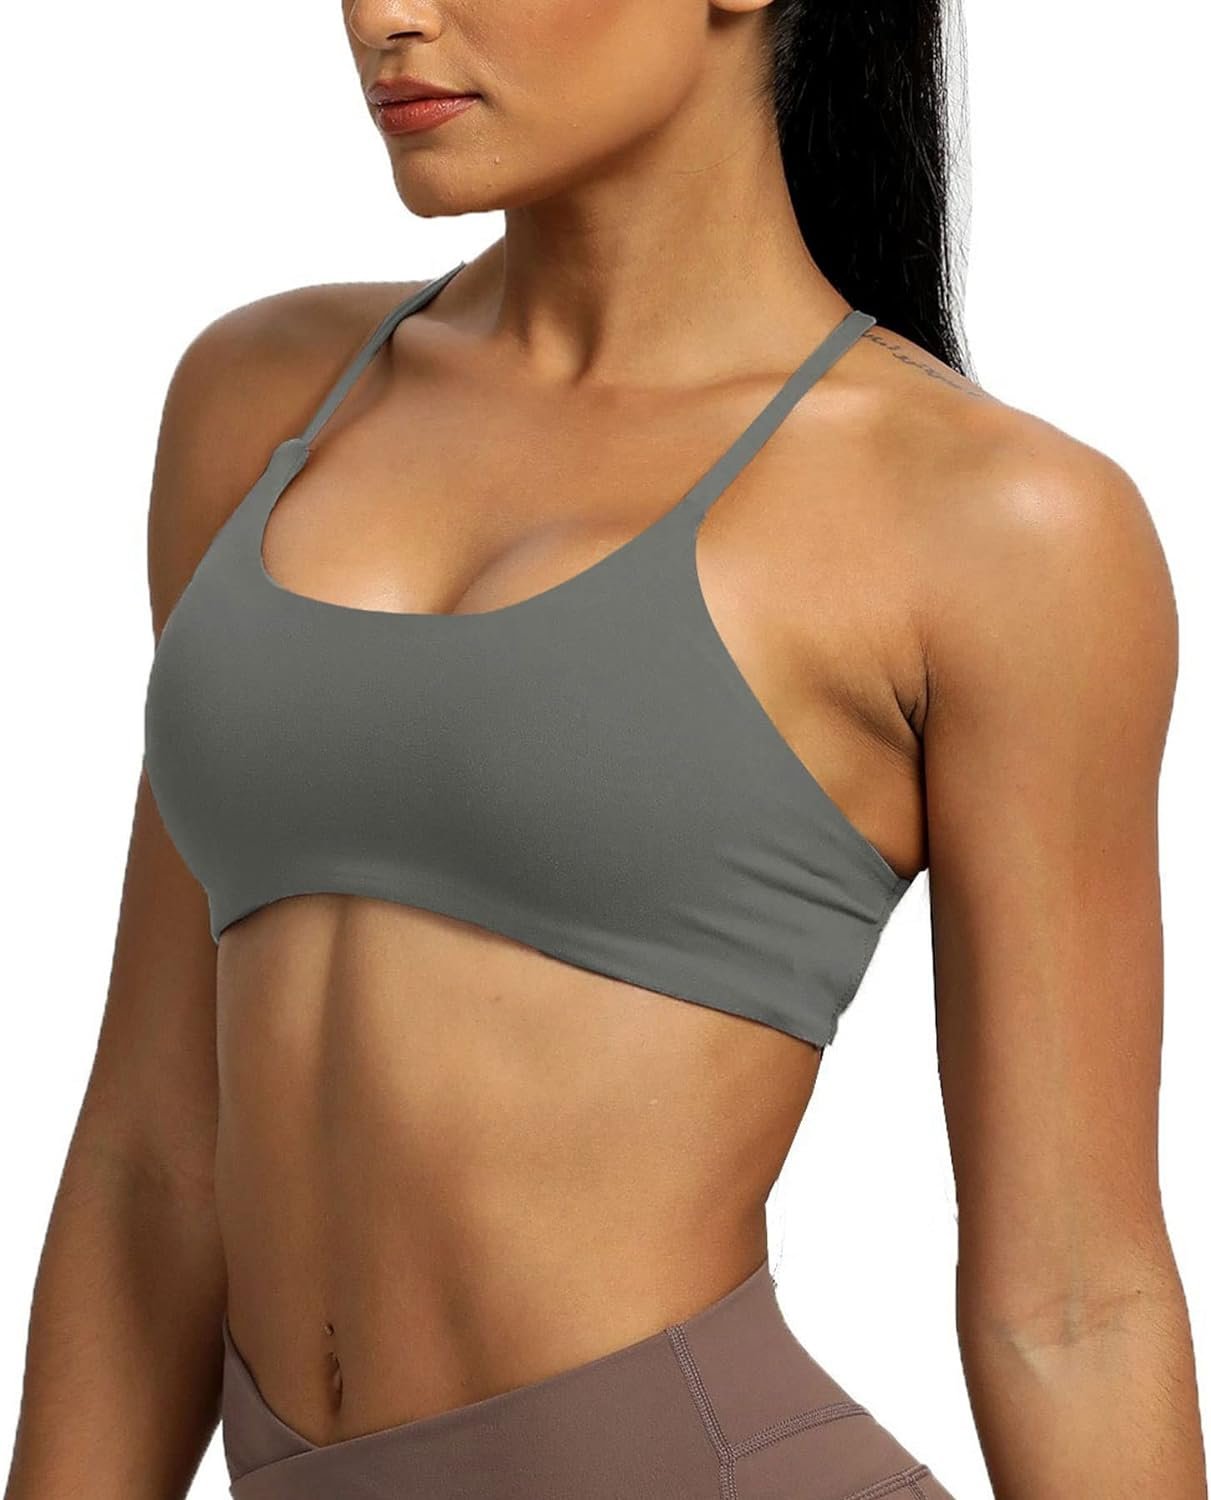 Aoxjox Womens Workout Sports Bras Fitness Backless Padded Ivy Low Impact Bra Yoga Crop Tank Top